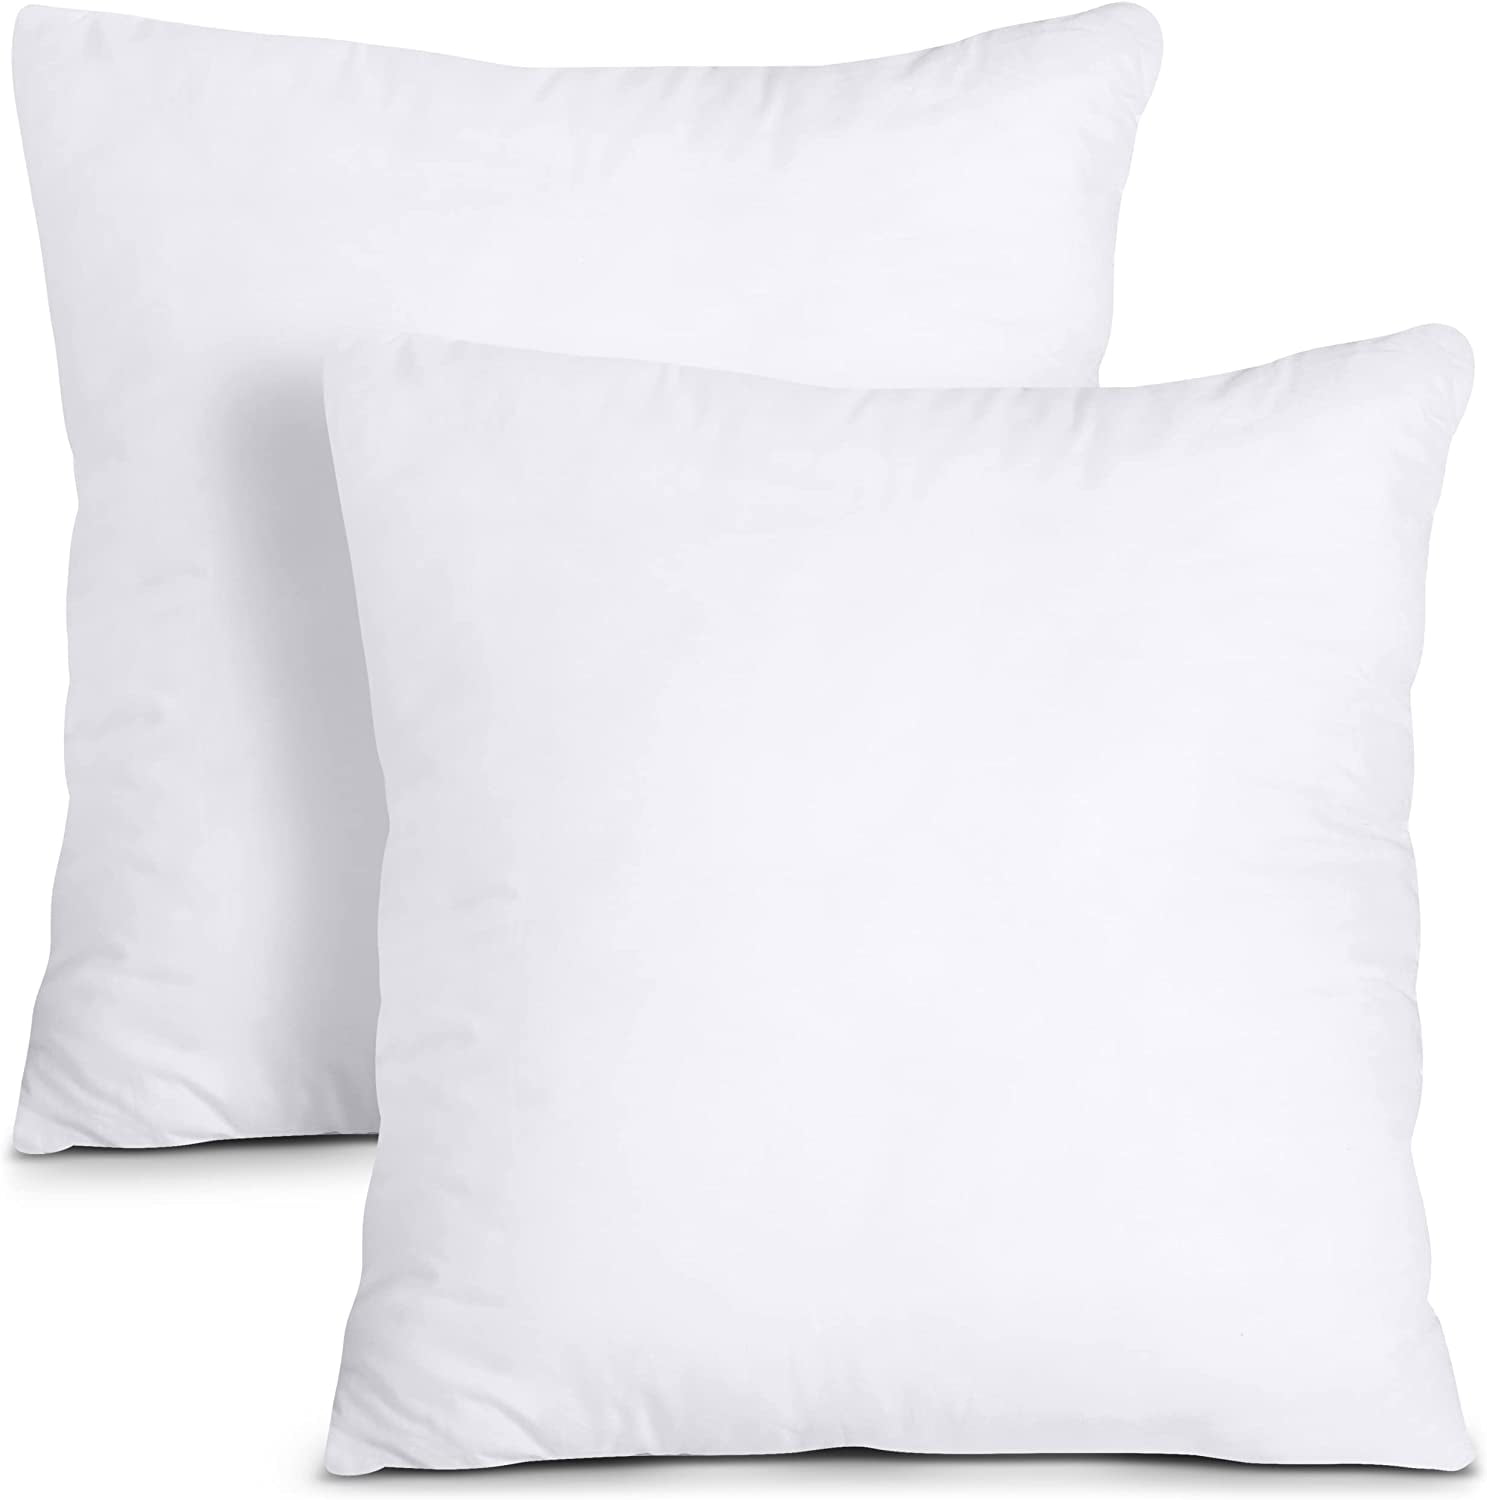 SGI bedding Throw Pillow Inserts - Bed & Couch Pillows - Indoor Decorative  Pillow Insert Pair - Throw Pillow Inserts with 100% Cotton Cover - Pack of